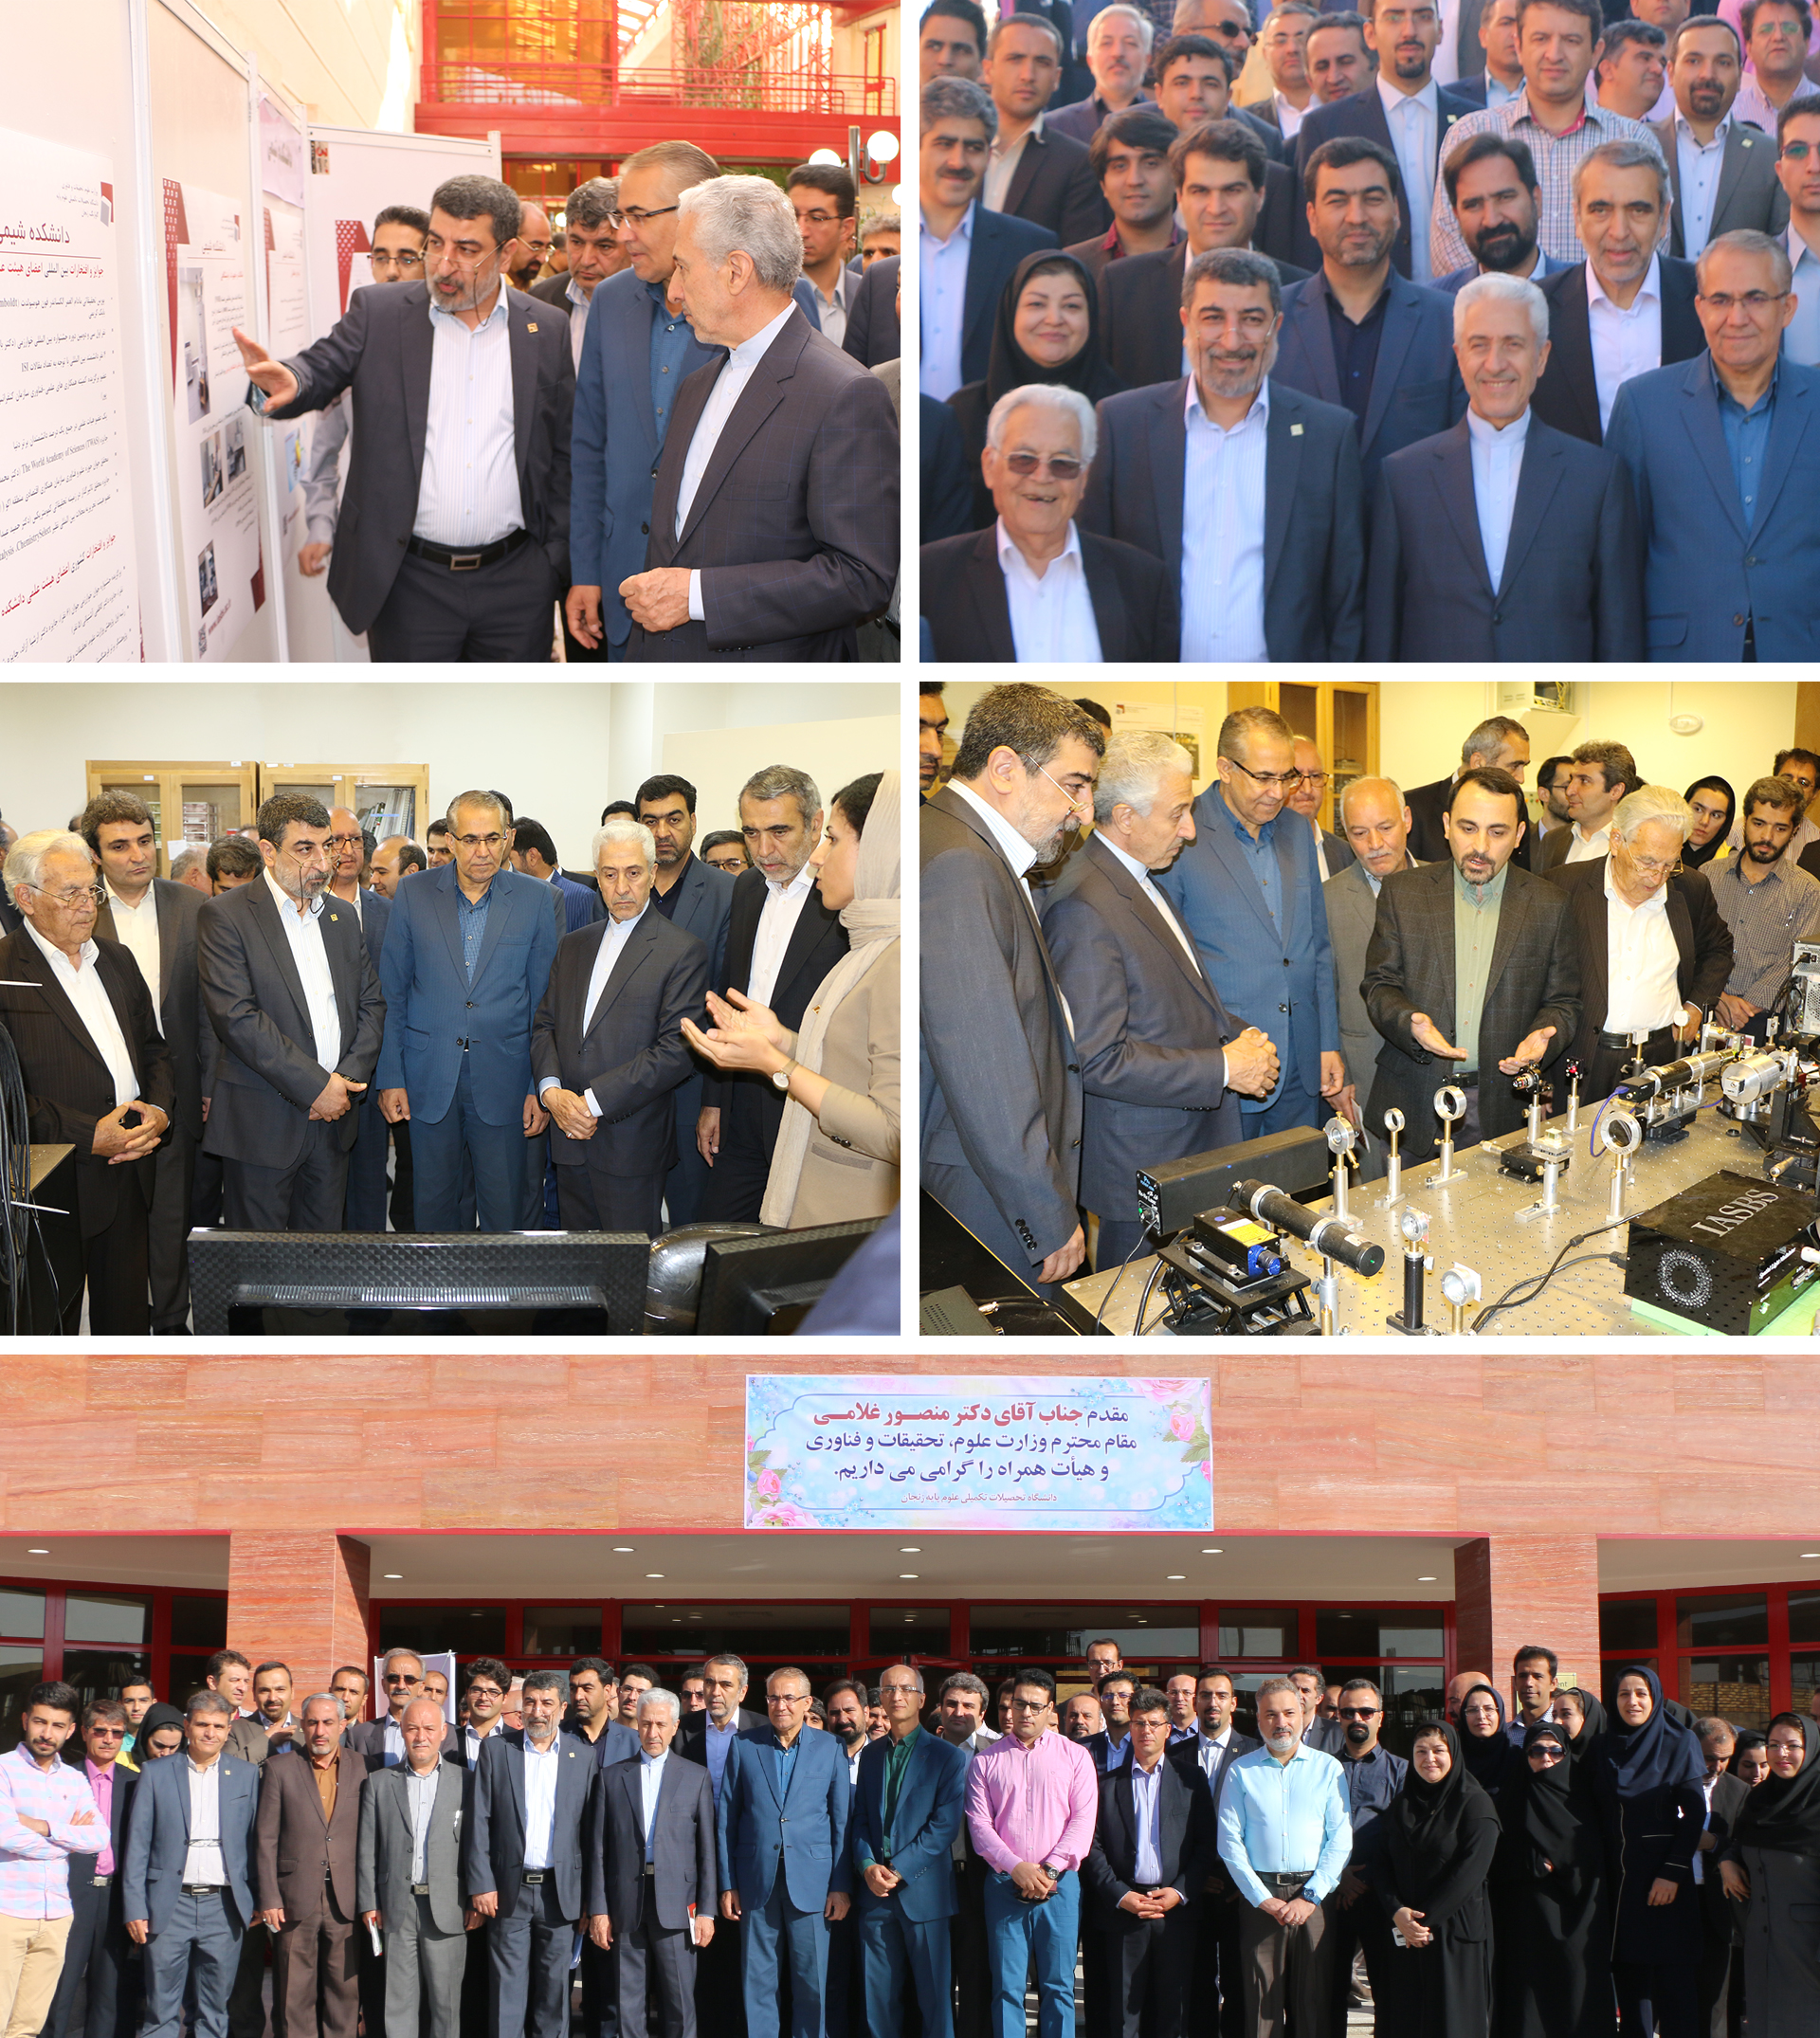  Minister of Science inaugurates the Geological Sciences Department at IASBS during Government Week